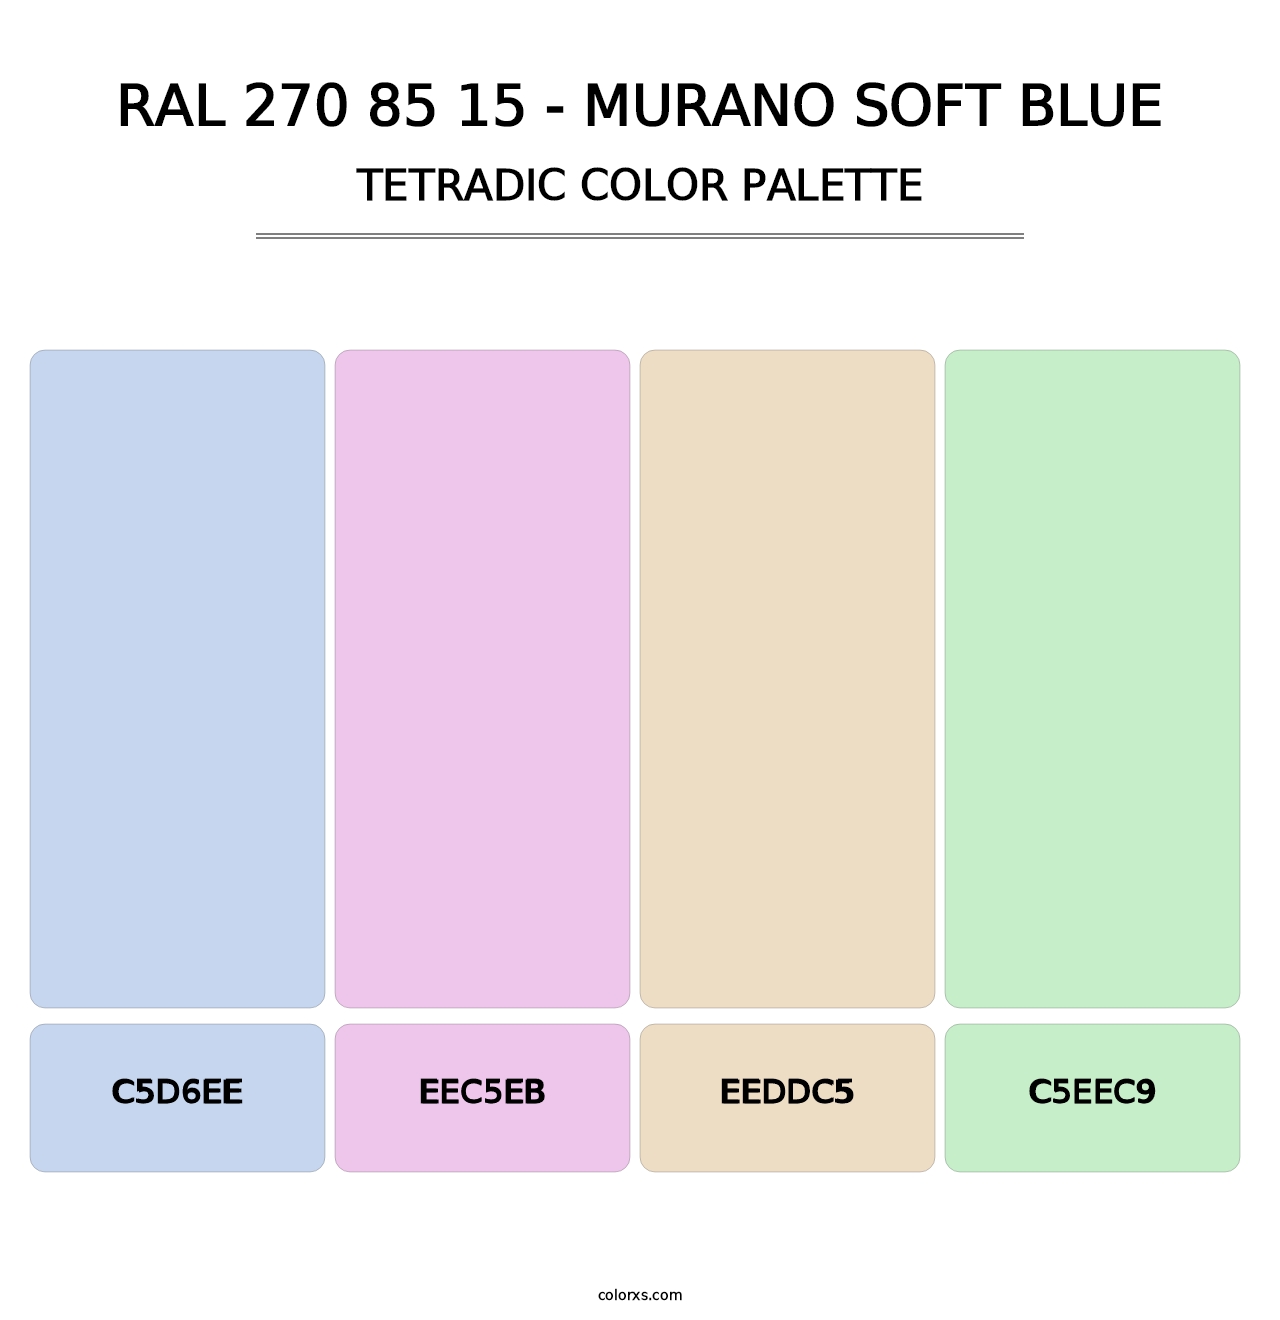 RAL 270 85 15 - Murano Soft Blue - Tetradic Color Palette